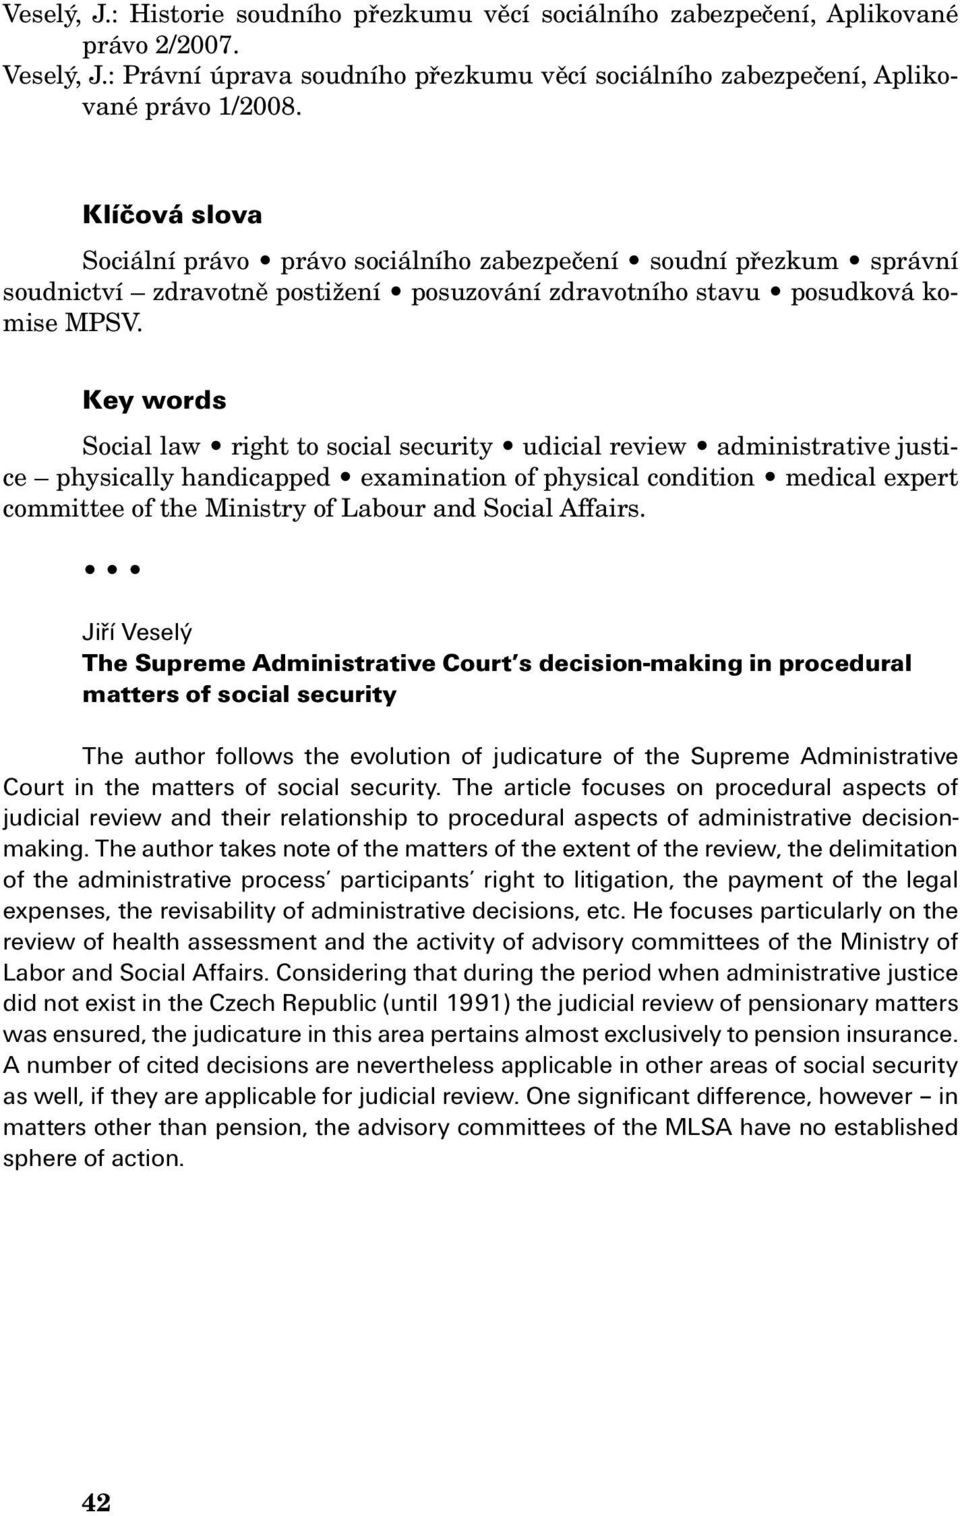 Key words Social law right to social security udicial review administrative justice physically handicapped examination of physical condition medical expert committee of the Ministry of Labour and